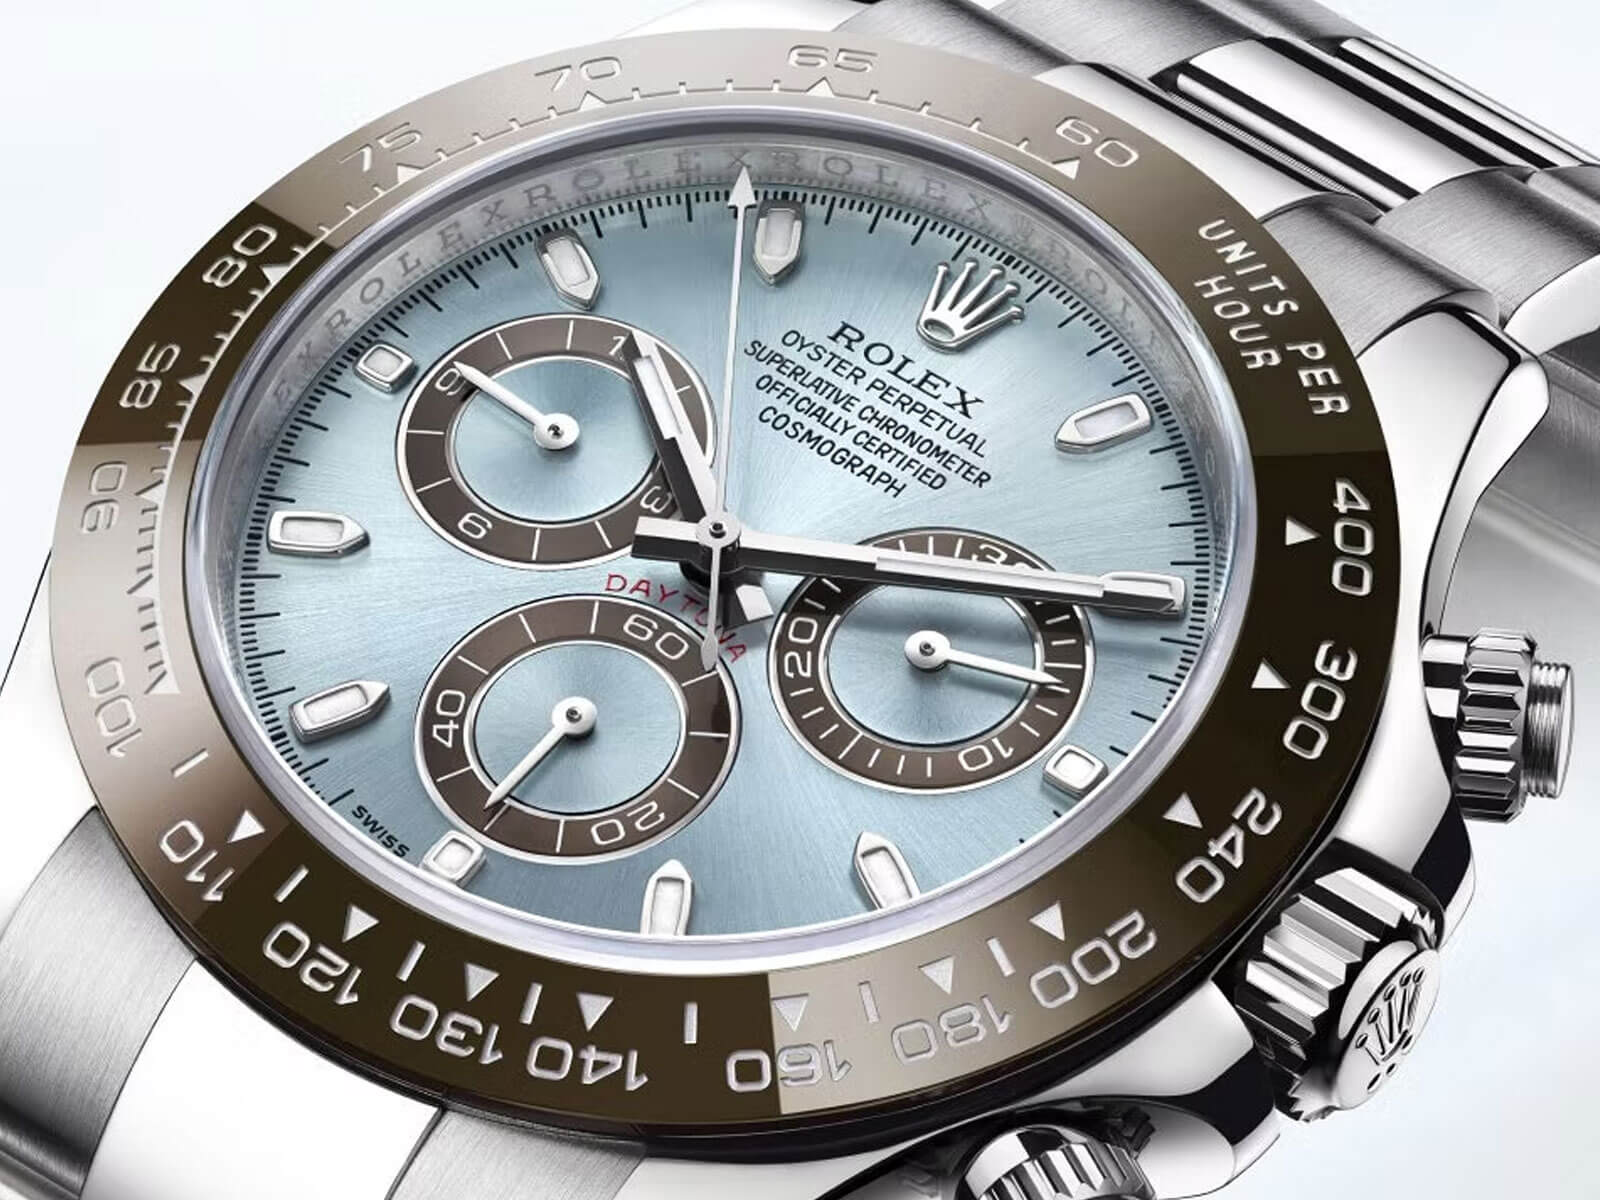 Rolex Cosmograph Daytona 116506 is the first Rolex model with the Cerachrom Monobloc Bezel